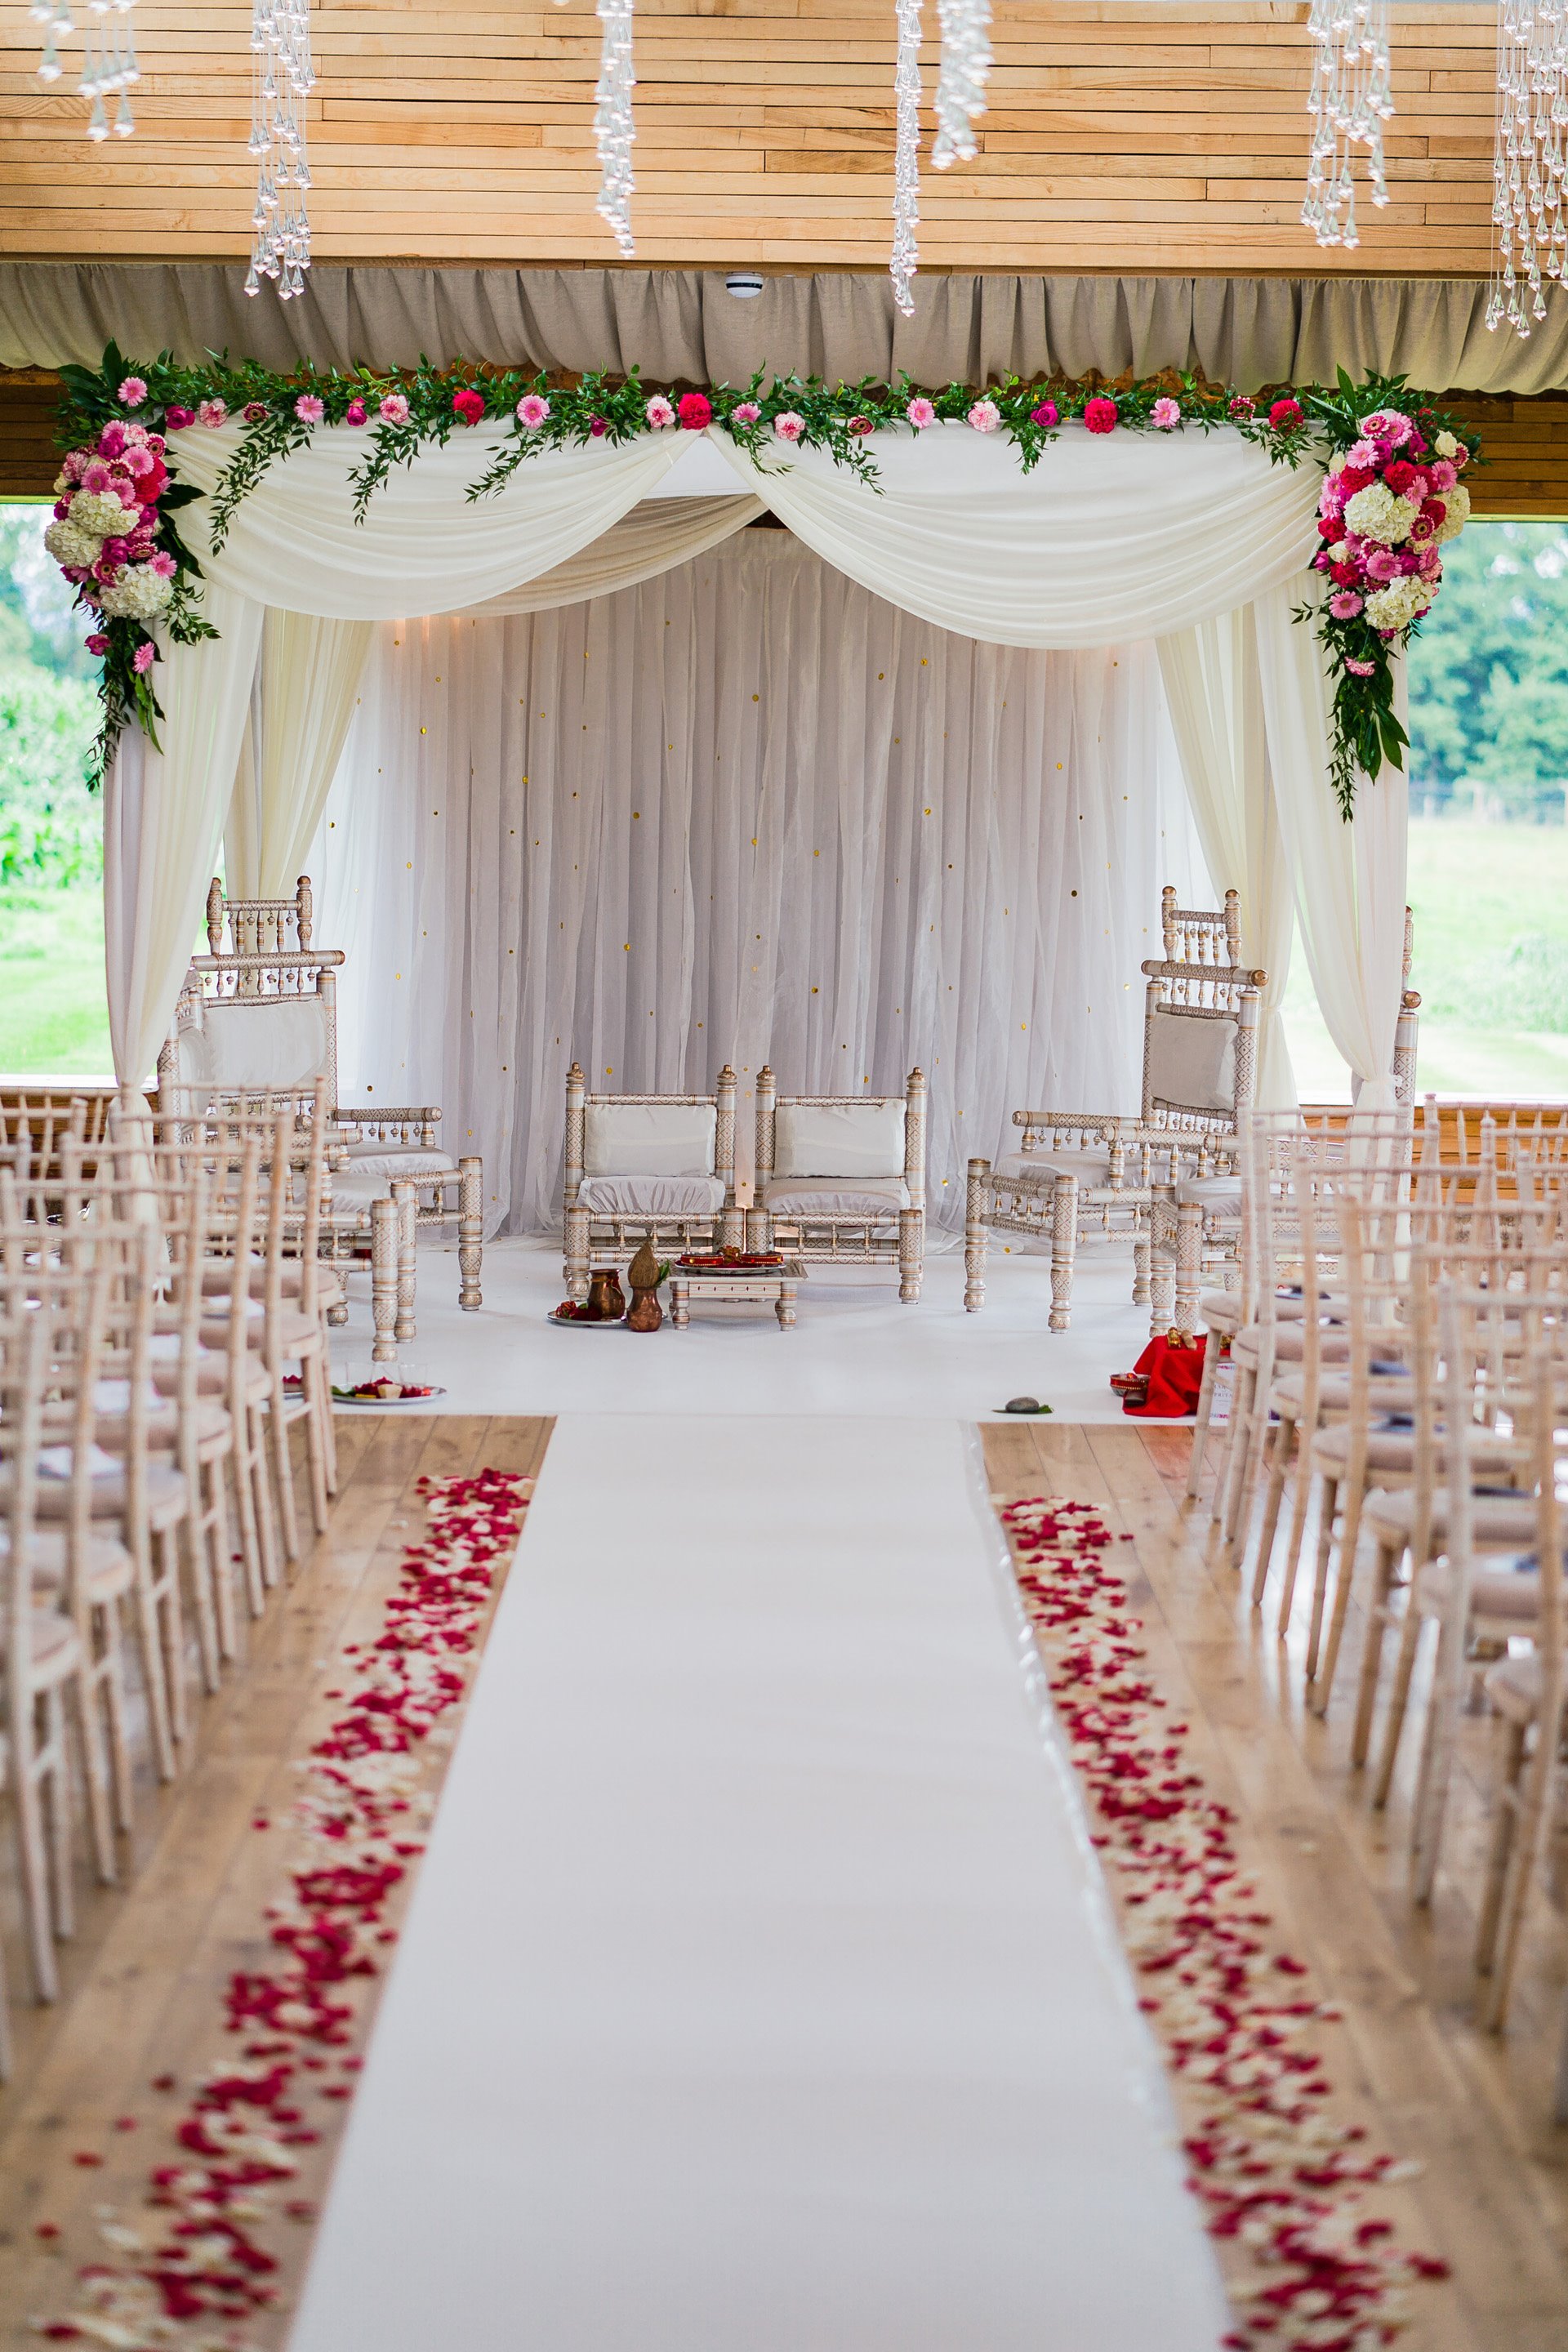 Beautiful white and pink Mandap with petal aisle in the Gillyflower at indian wedding venue elmore court